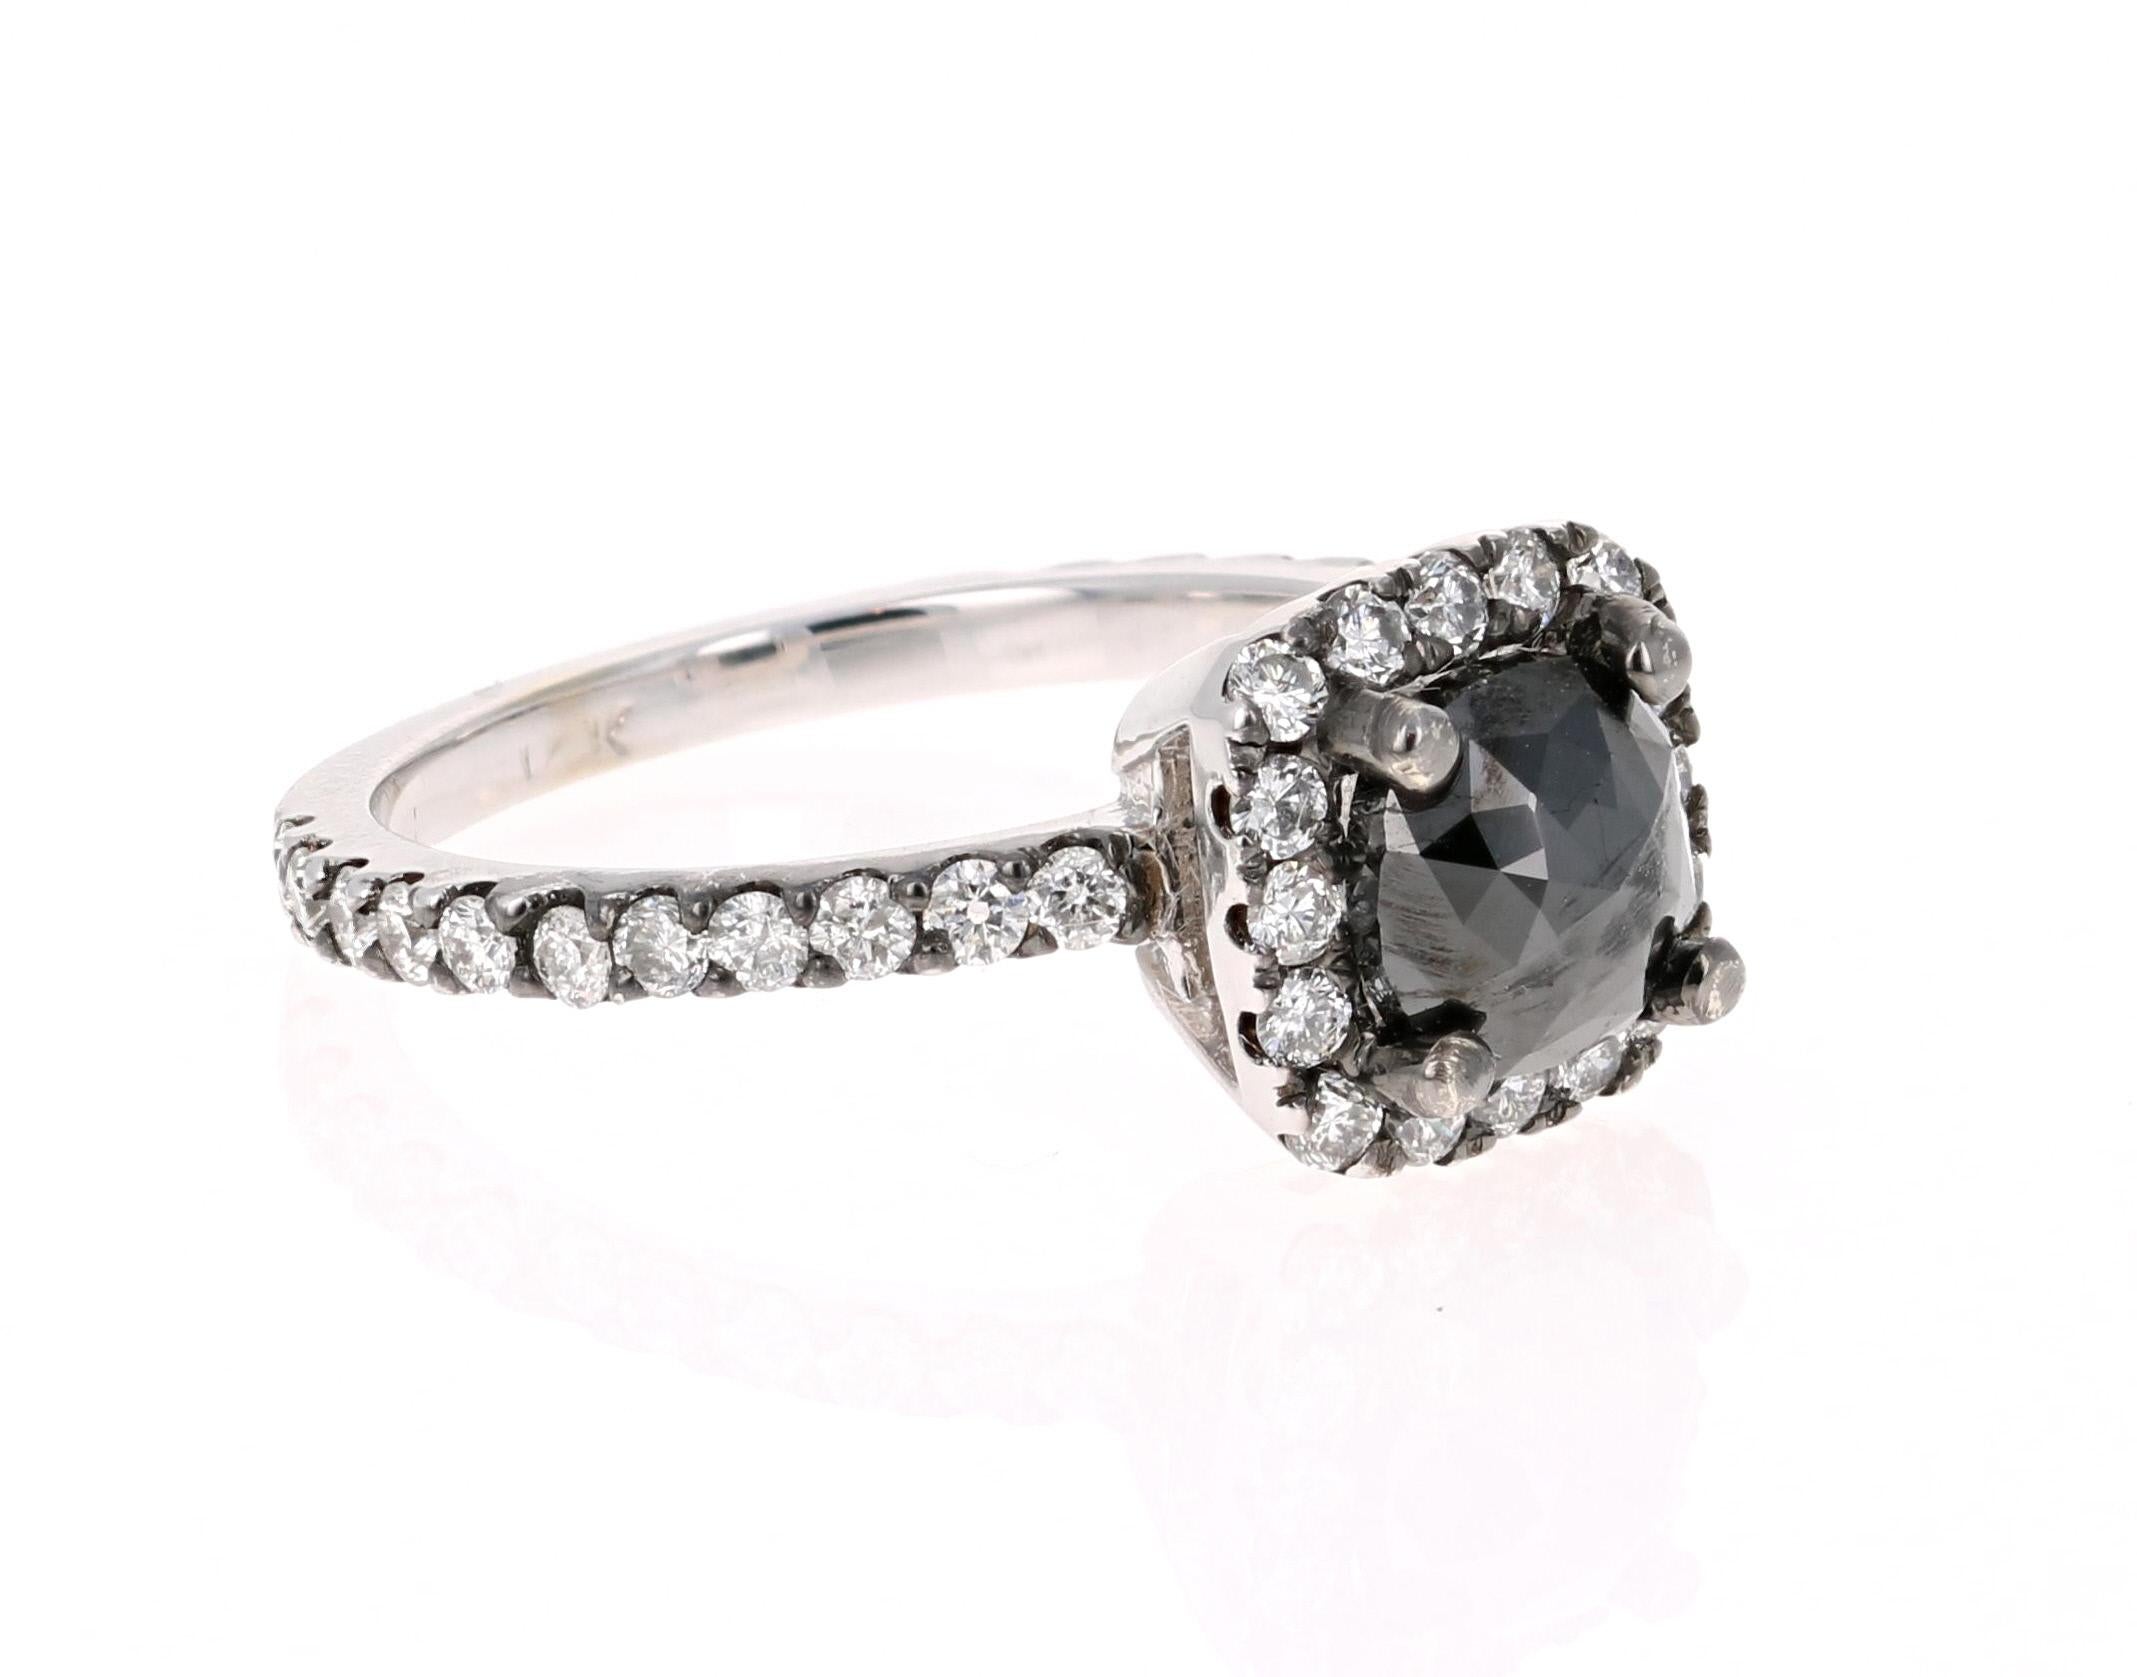 This Black and White Diamond Ring is a unique Engagement Ring or an every day ring! 

Beautiful Round Cut Black Diamond that weighs 1.02 Carats and is surrounded by 38 Round Cut Diamonds that weigh 0.62 Carats. 

Crafted in 14 Karat White Gold and